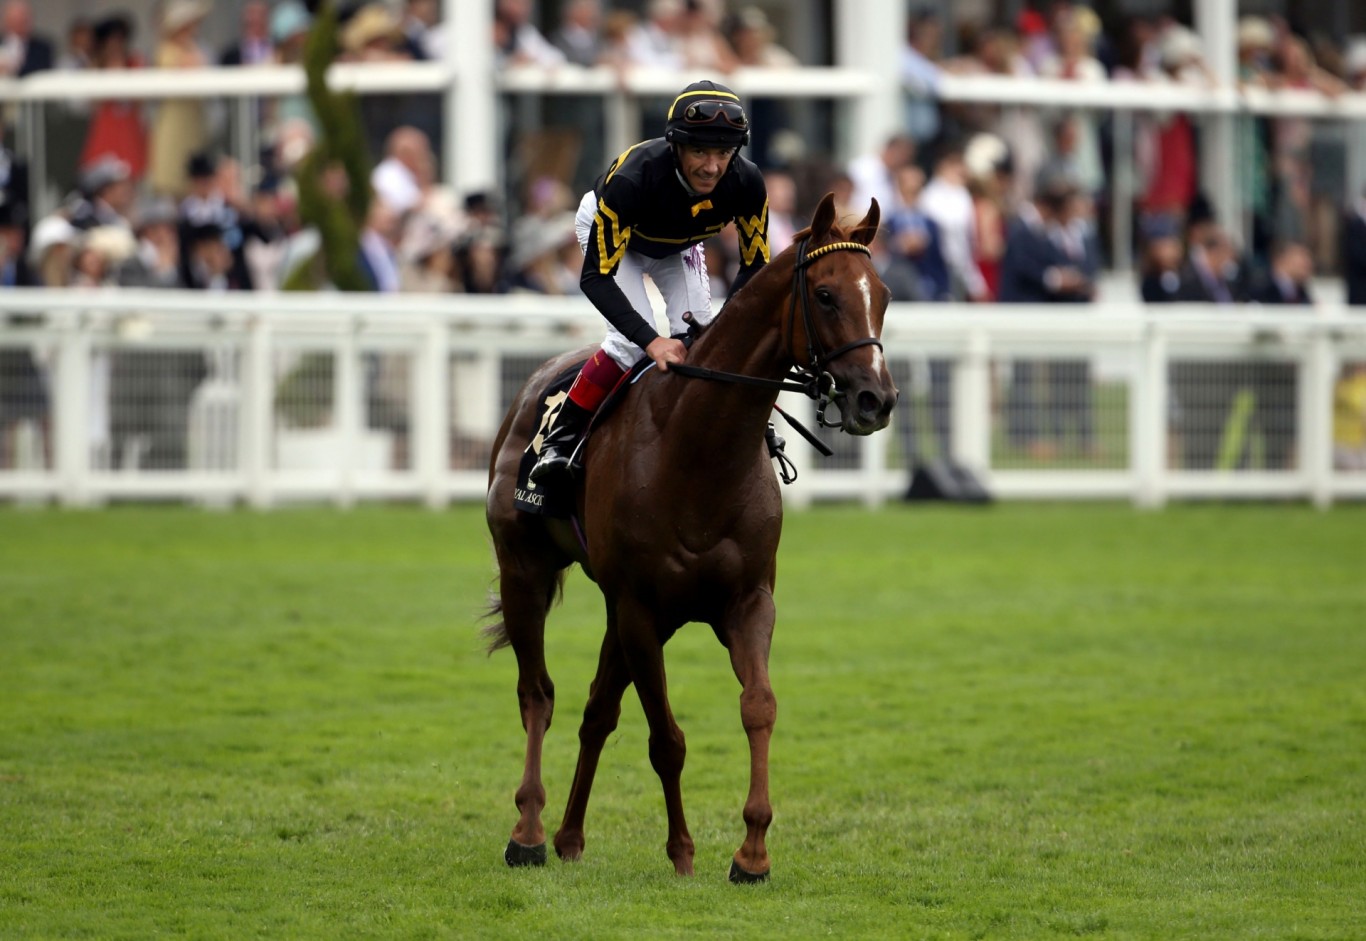 Why was Undrafted a 22/1 winner of the Diamond Jubilee Stakes?